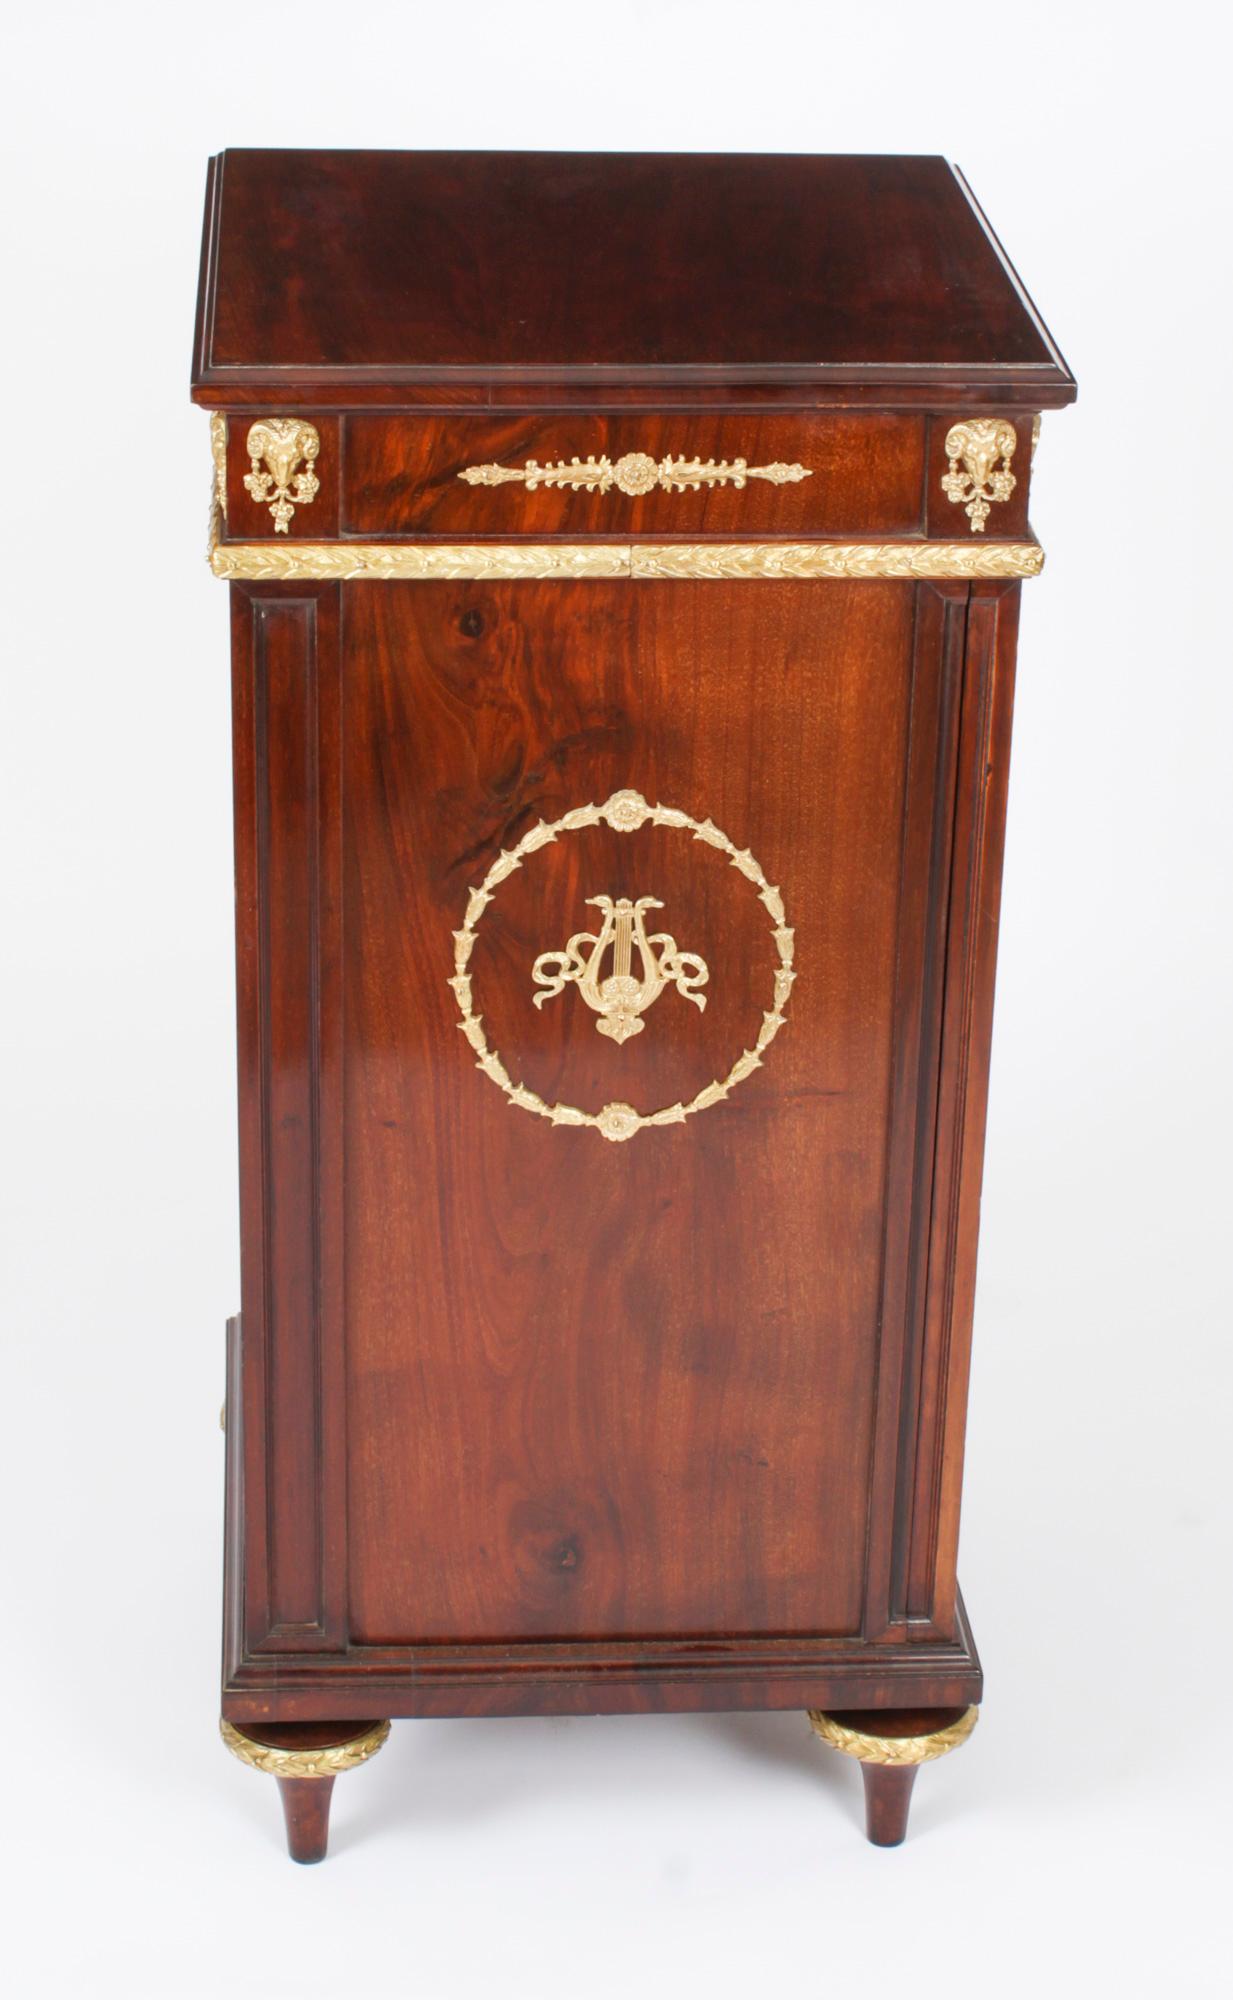 Antique French Empire Mahogany Pedestal Bust Stand Cabinet 19th Century In Good Condition For Sale In London, GB